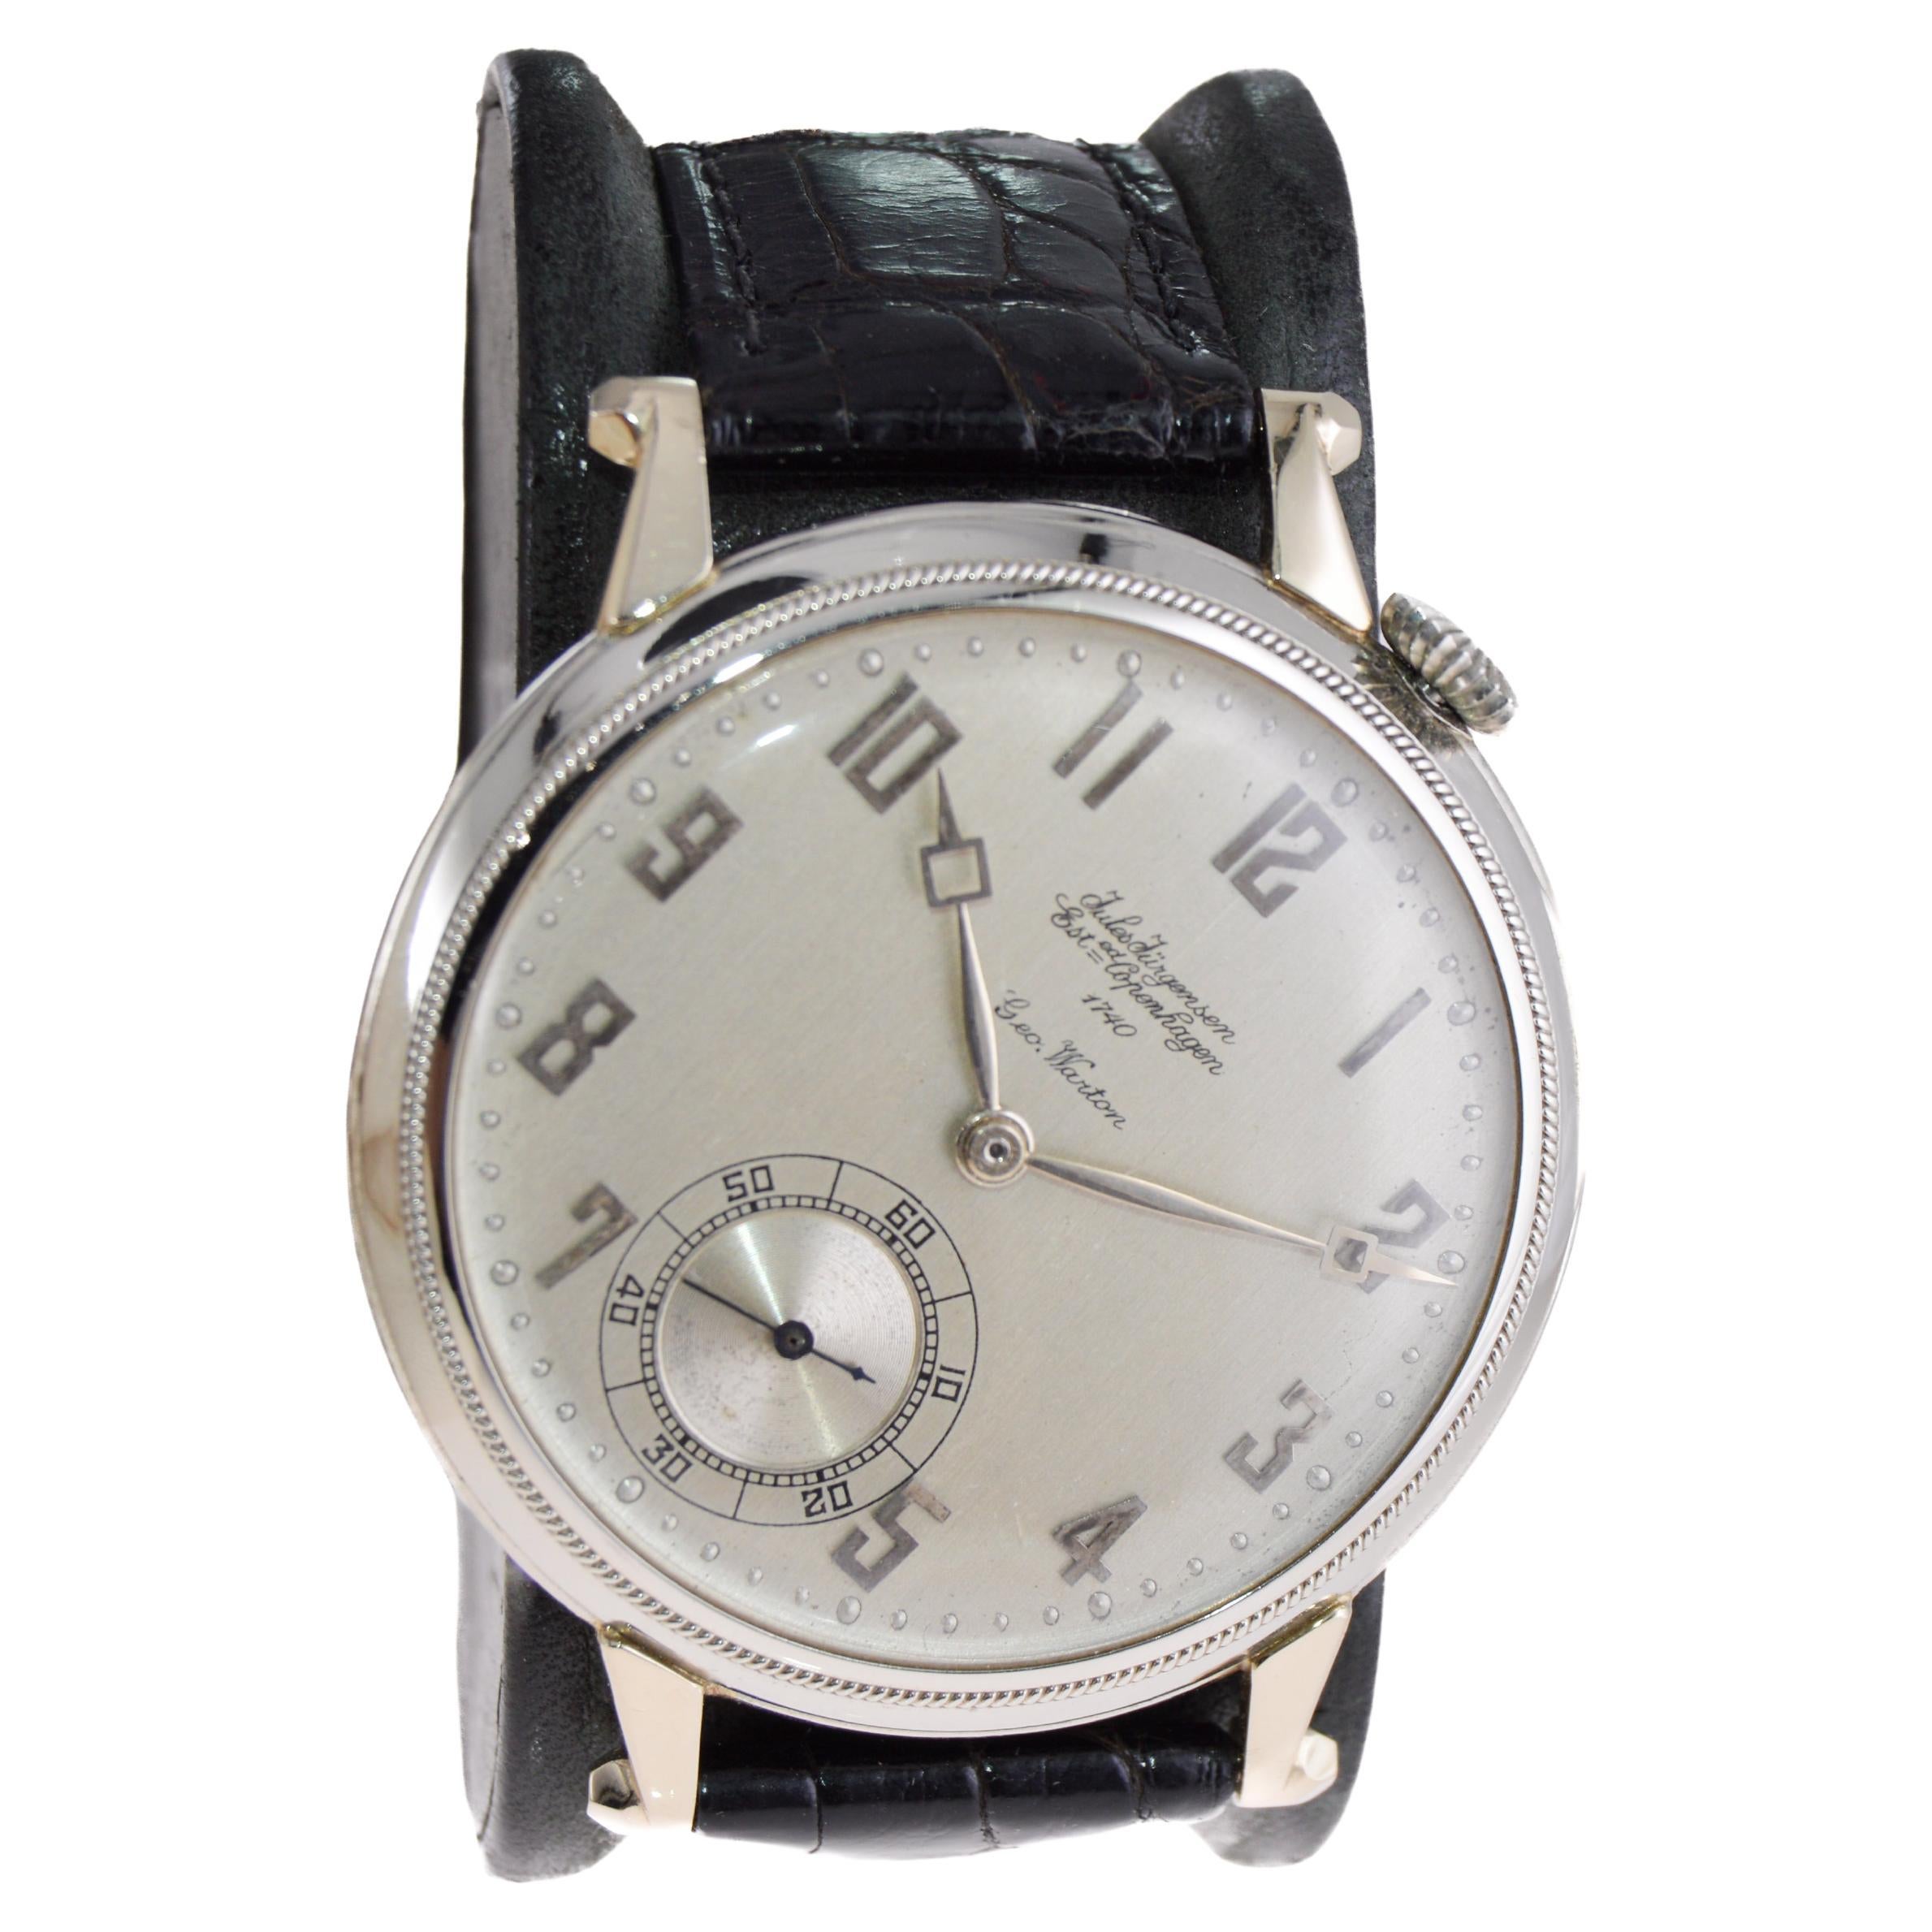 FACTORY / HOUSE: Jules Jurgensen
STYLE / REFERENCE: Art Deco / Pocket-Wrist Watch
METAL / MATERIAL: 18Kt. White Gold
DIMENSIONS: Length 51mm X Diameter 44mm
CIRCA: 1920's
MOVEMENT / CALIBER: Manual Winding / 19 Jewels / High Grade Hand Made
DIAL /